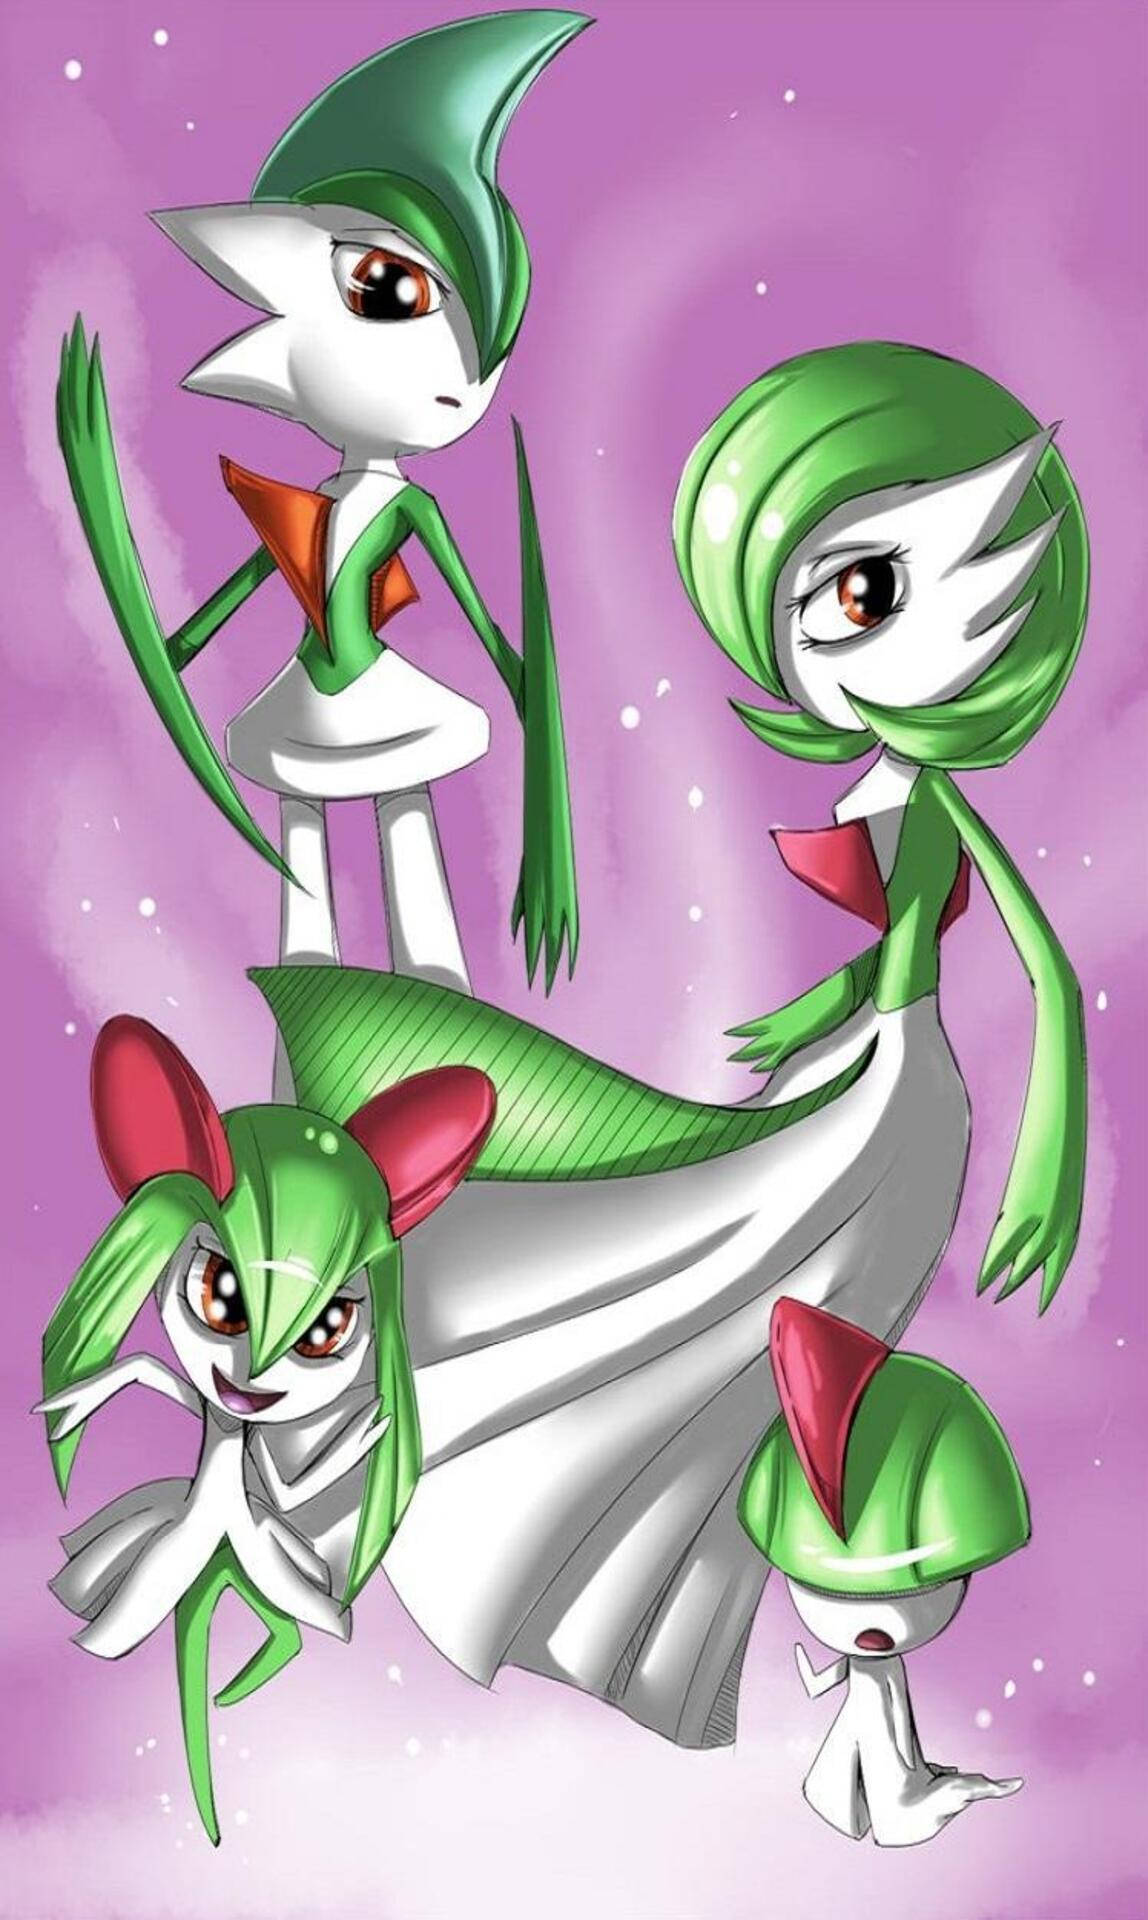 The Graceful Gardevoir Stands Ready For Battle. Background